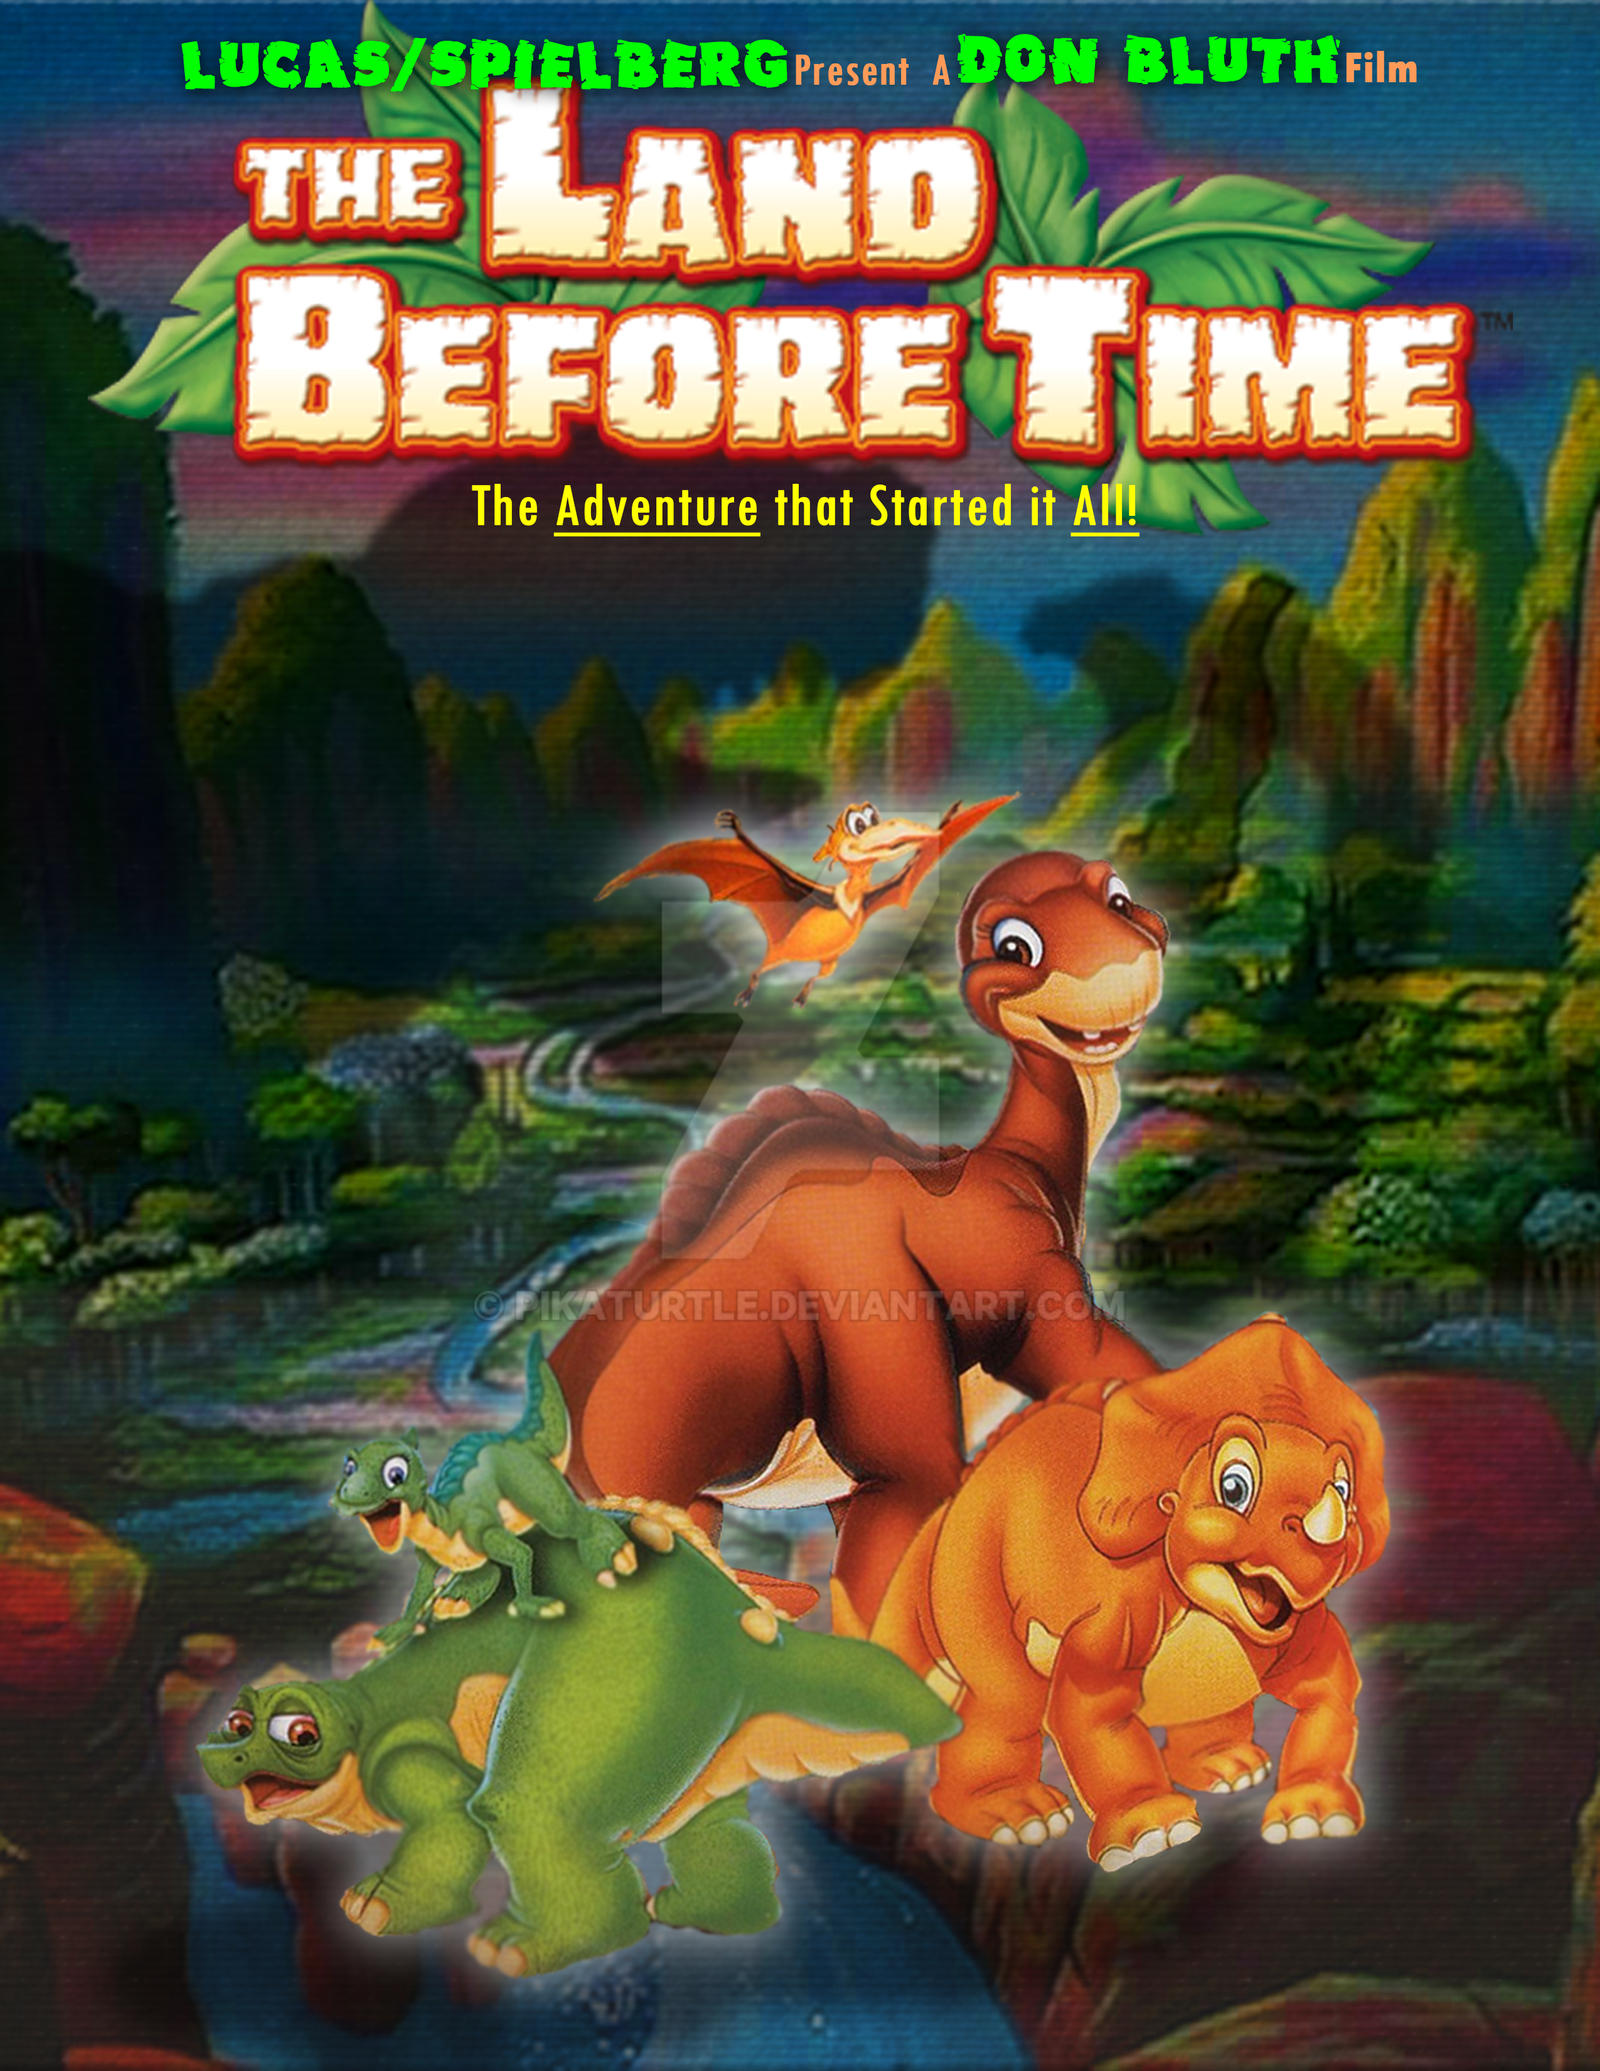 the_land_before_time_movie_poster_remake_by_pikaturtle-d7w2wwd.jpg